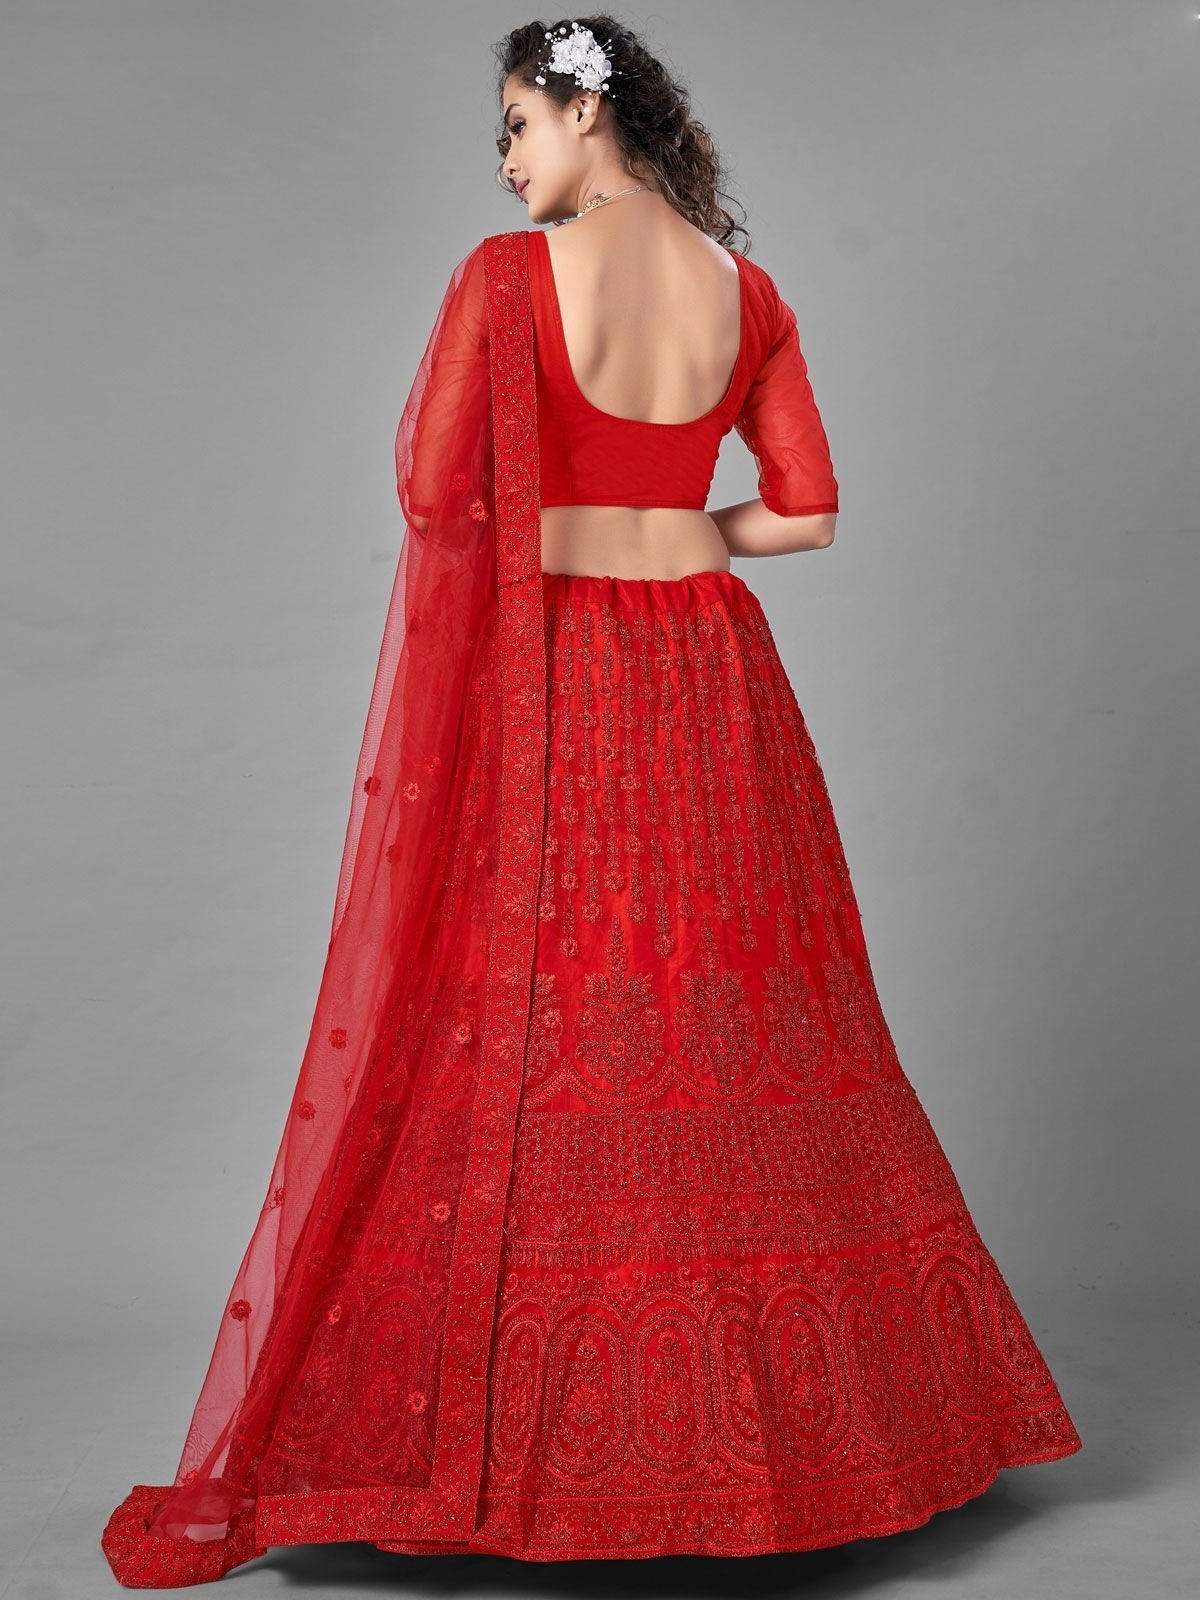 Indian lehenga for women red bridal party wear lehenga | Latest bridal  lehenga, Bridal lehenga red, Indian bridal fashion